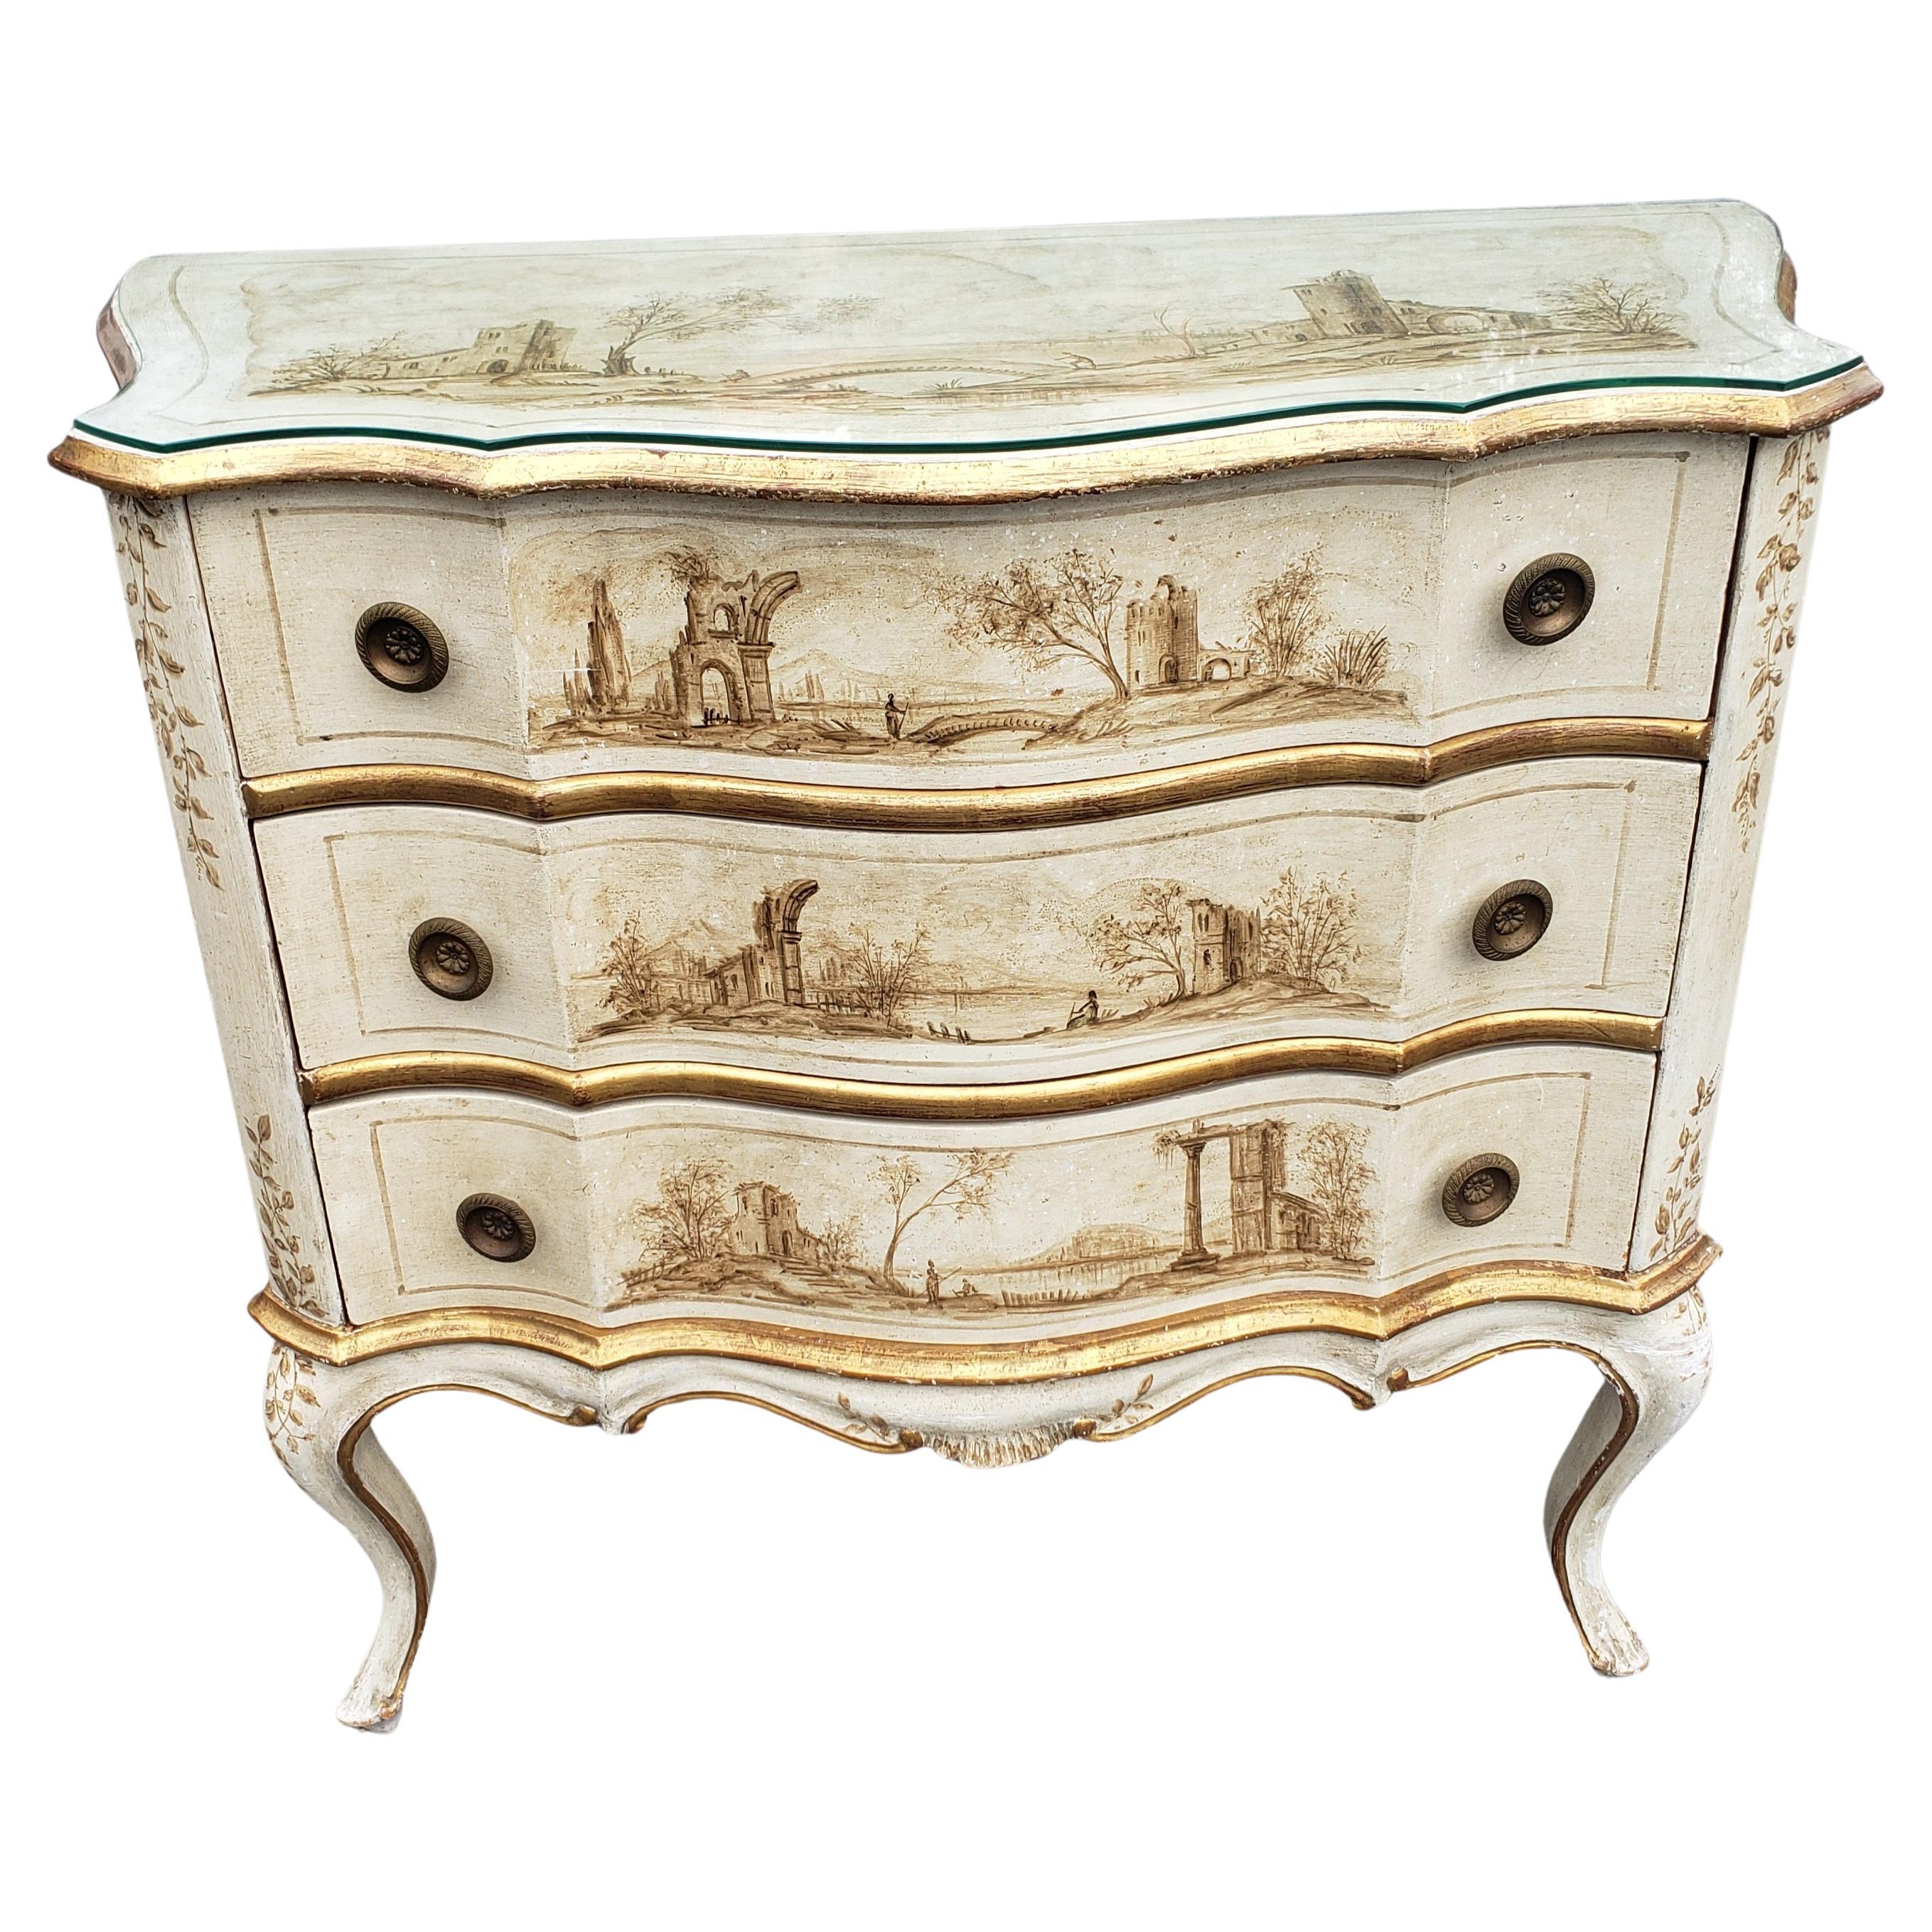 Early 20th C. Venetian Hand-Painted and Decorated Partial Gilt Commode w/ Glass For Sale